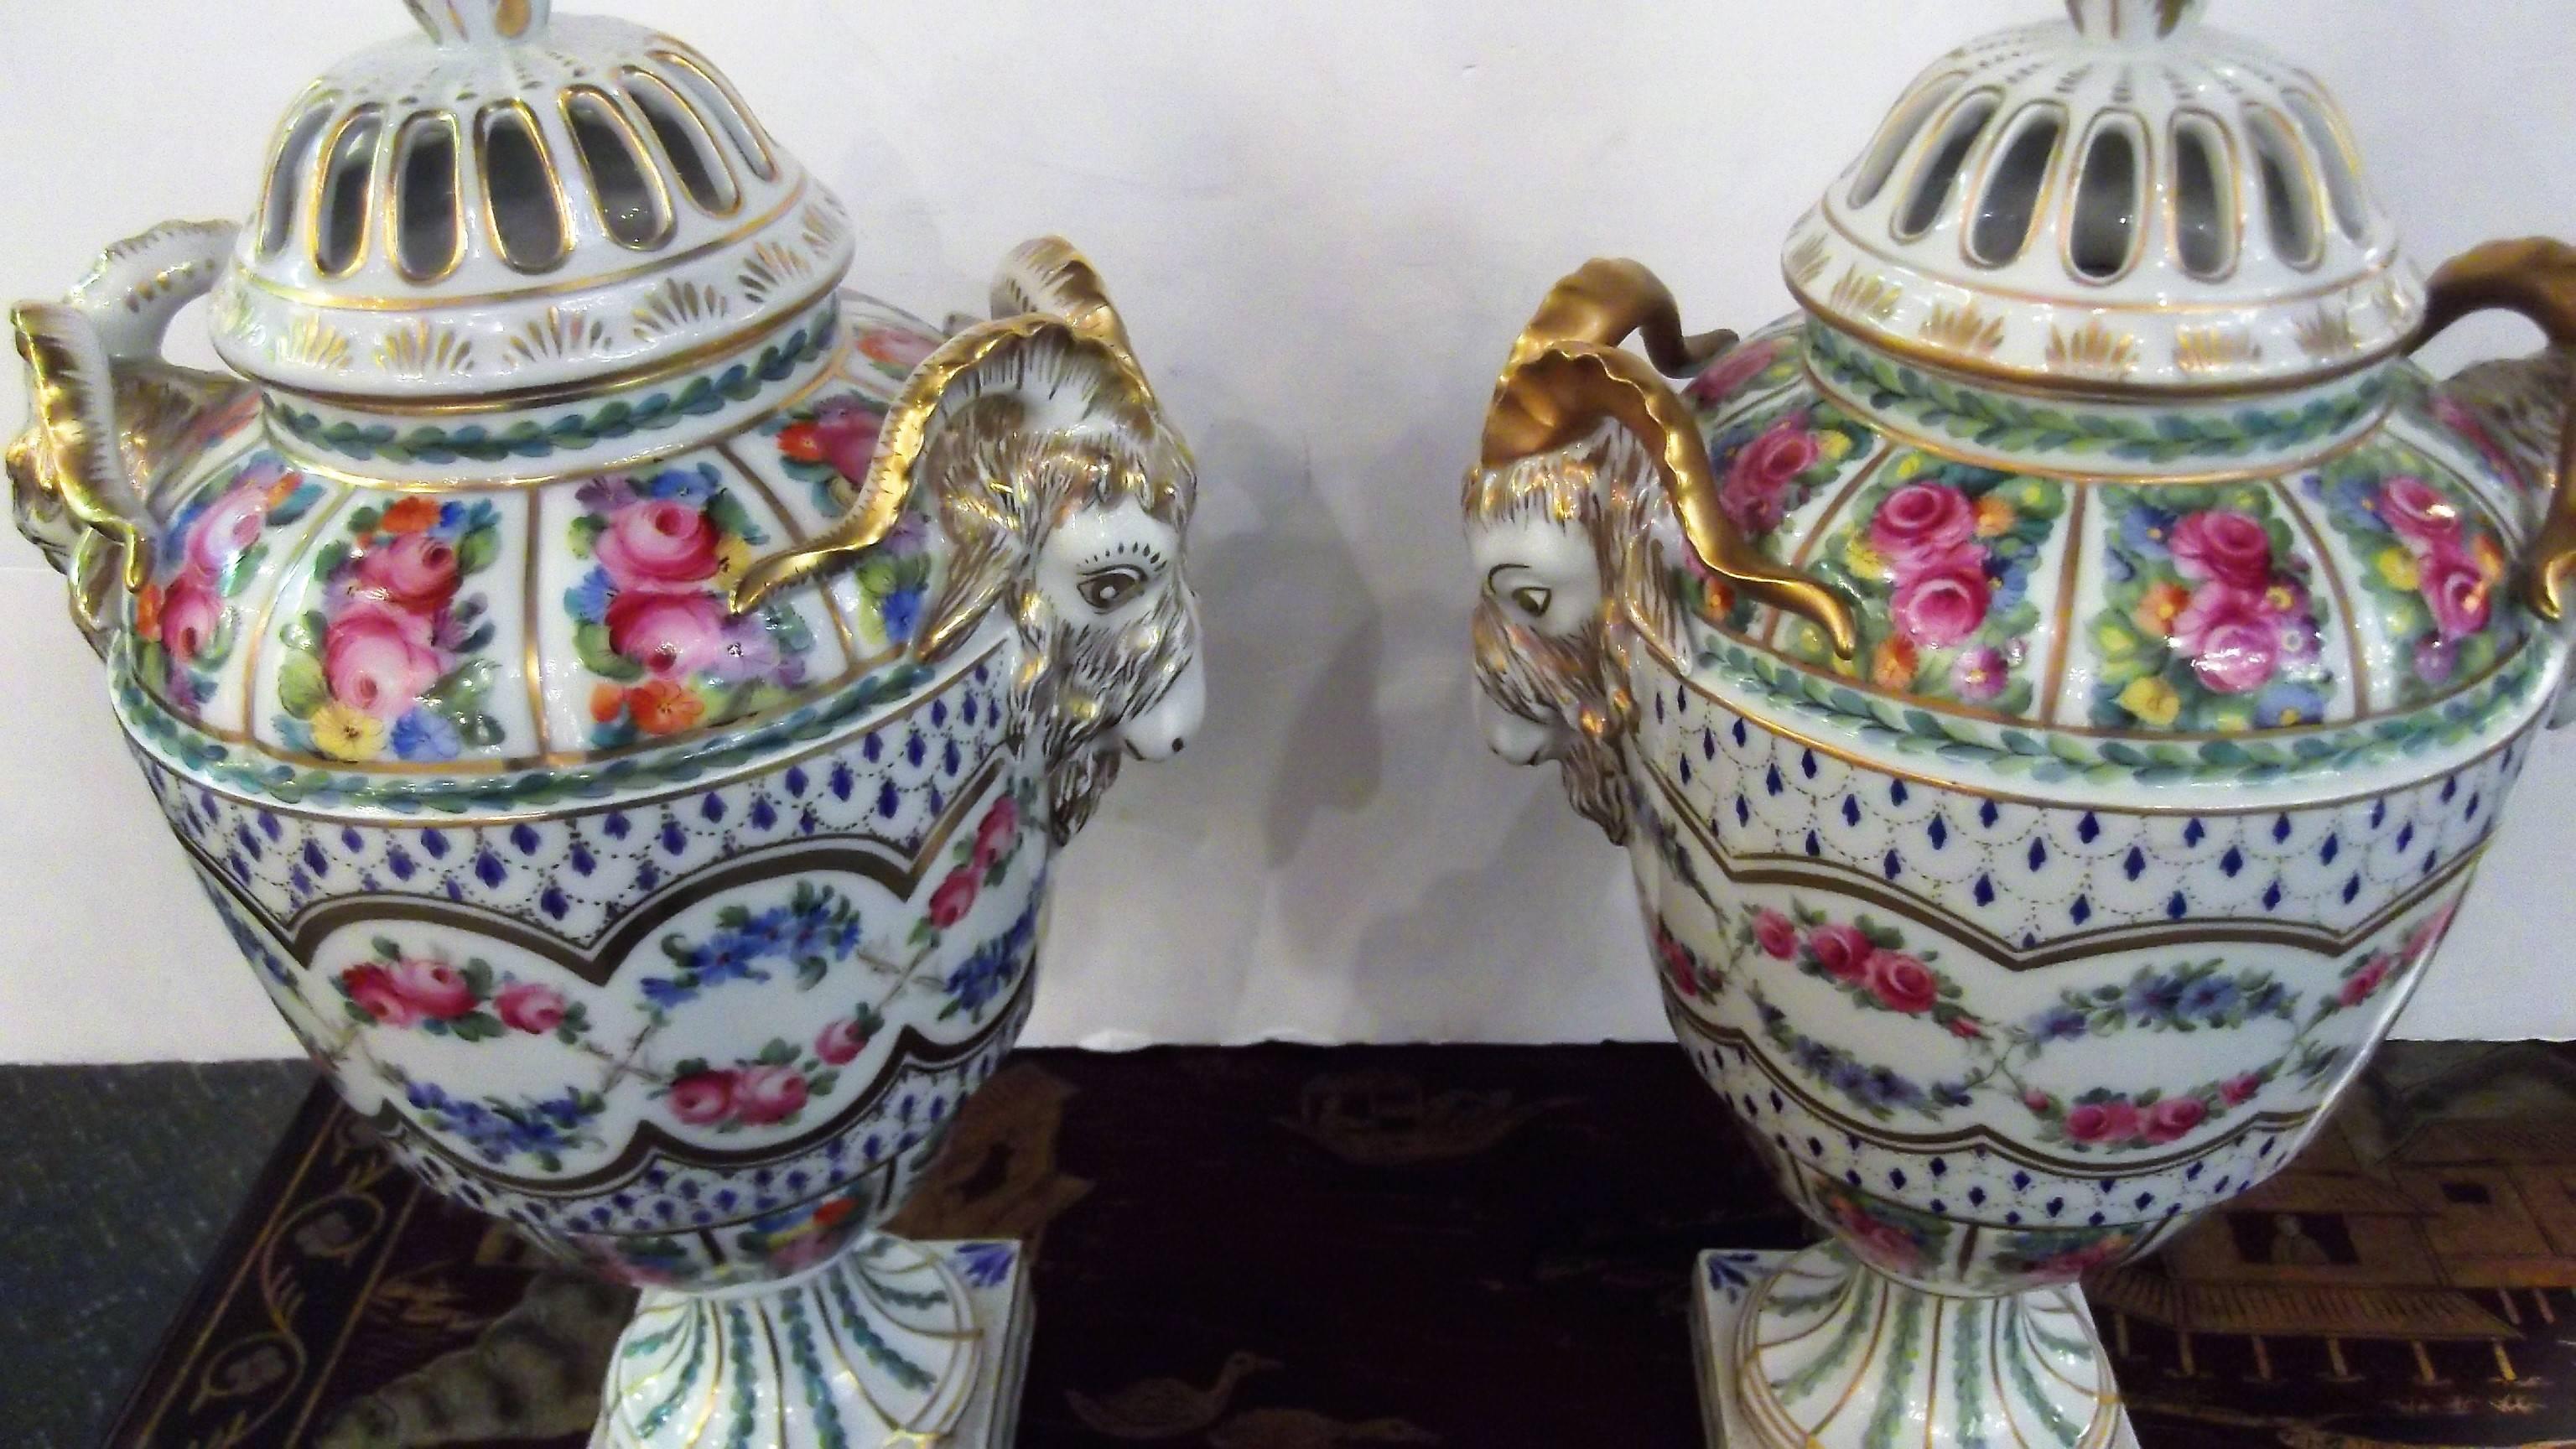 An impressive Dresden hand painted floral and gilt appointed ram's head urn. A gilt final topped on the pierced lid. The body is expertly hand decorated with gilt accents, floral swags and bouquets. All hand painted to perfection.
The urn resting